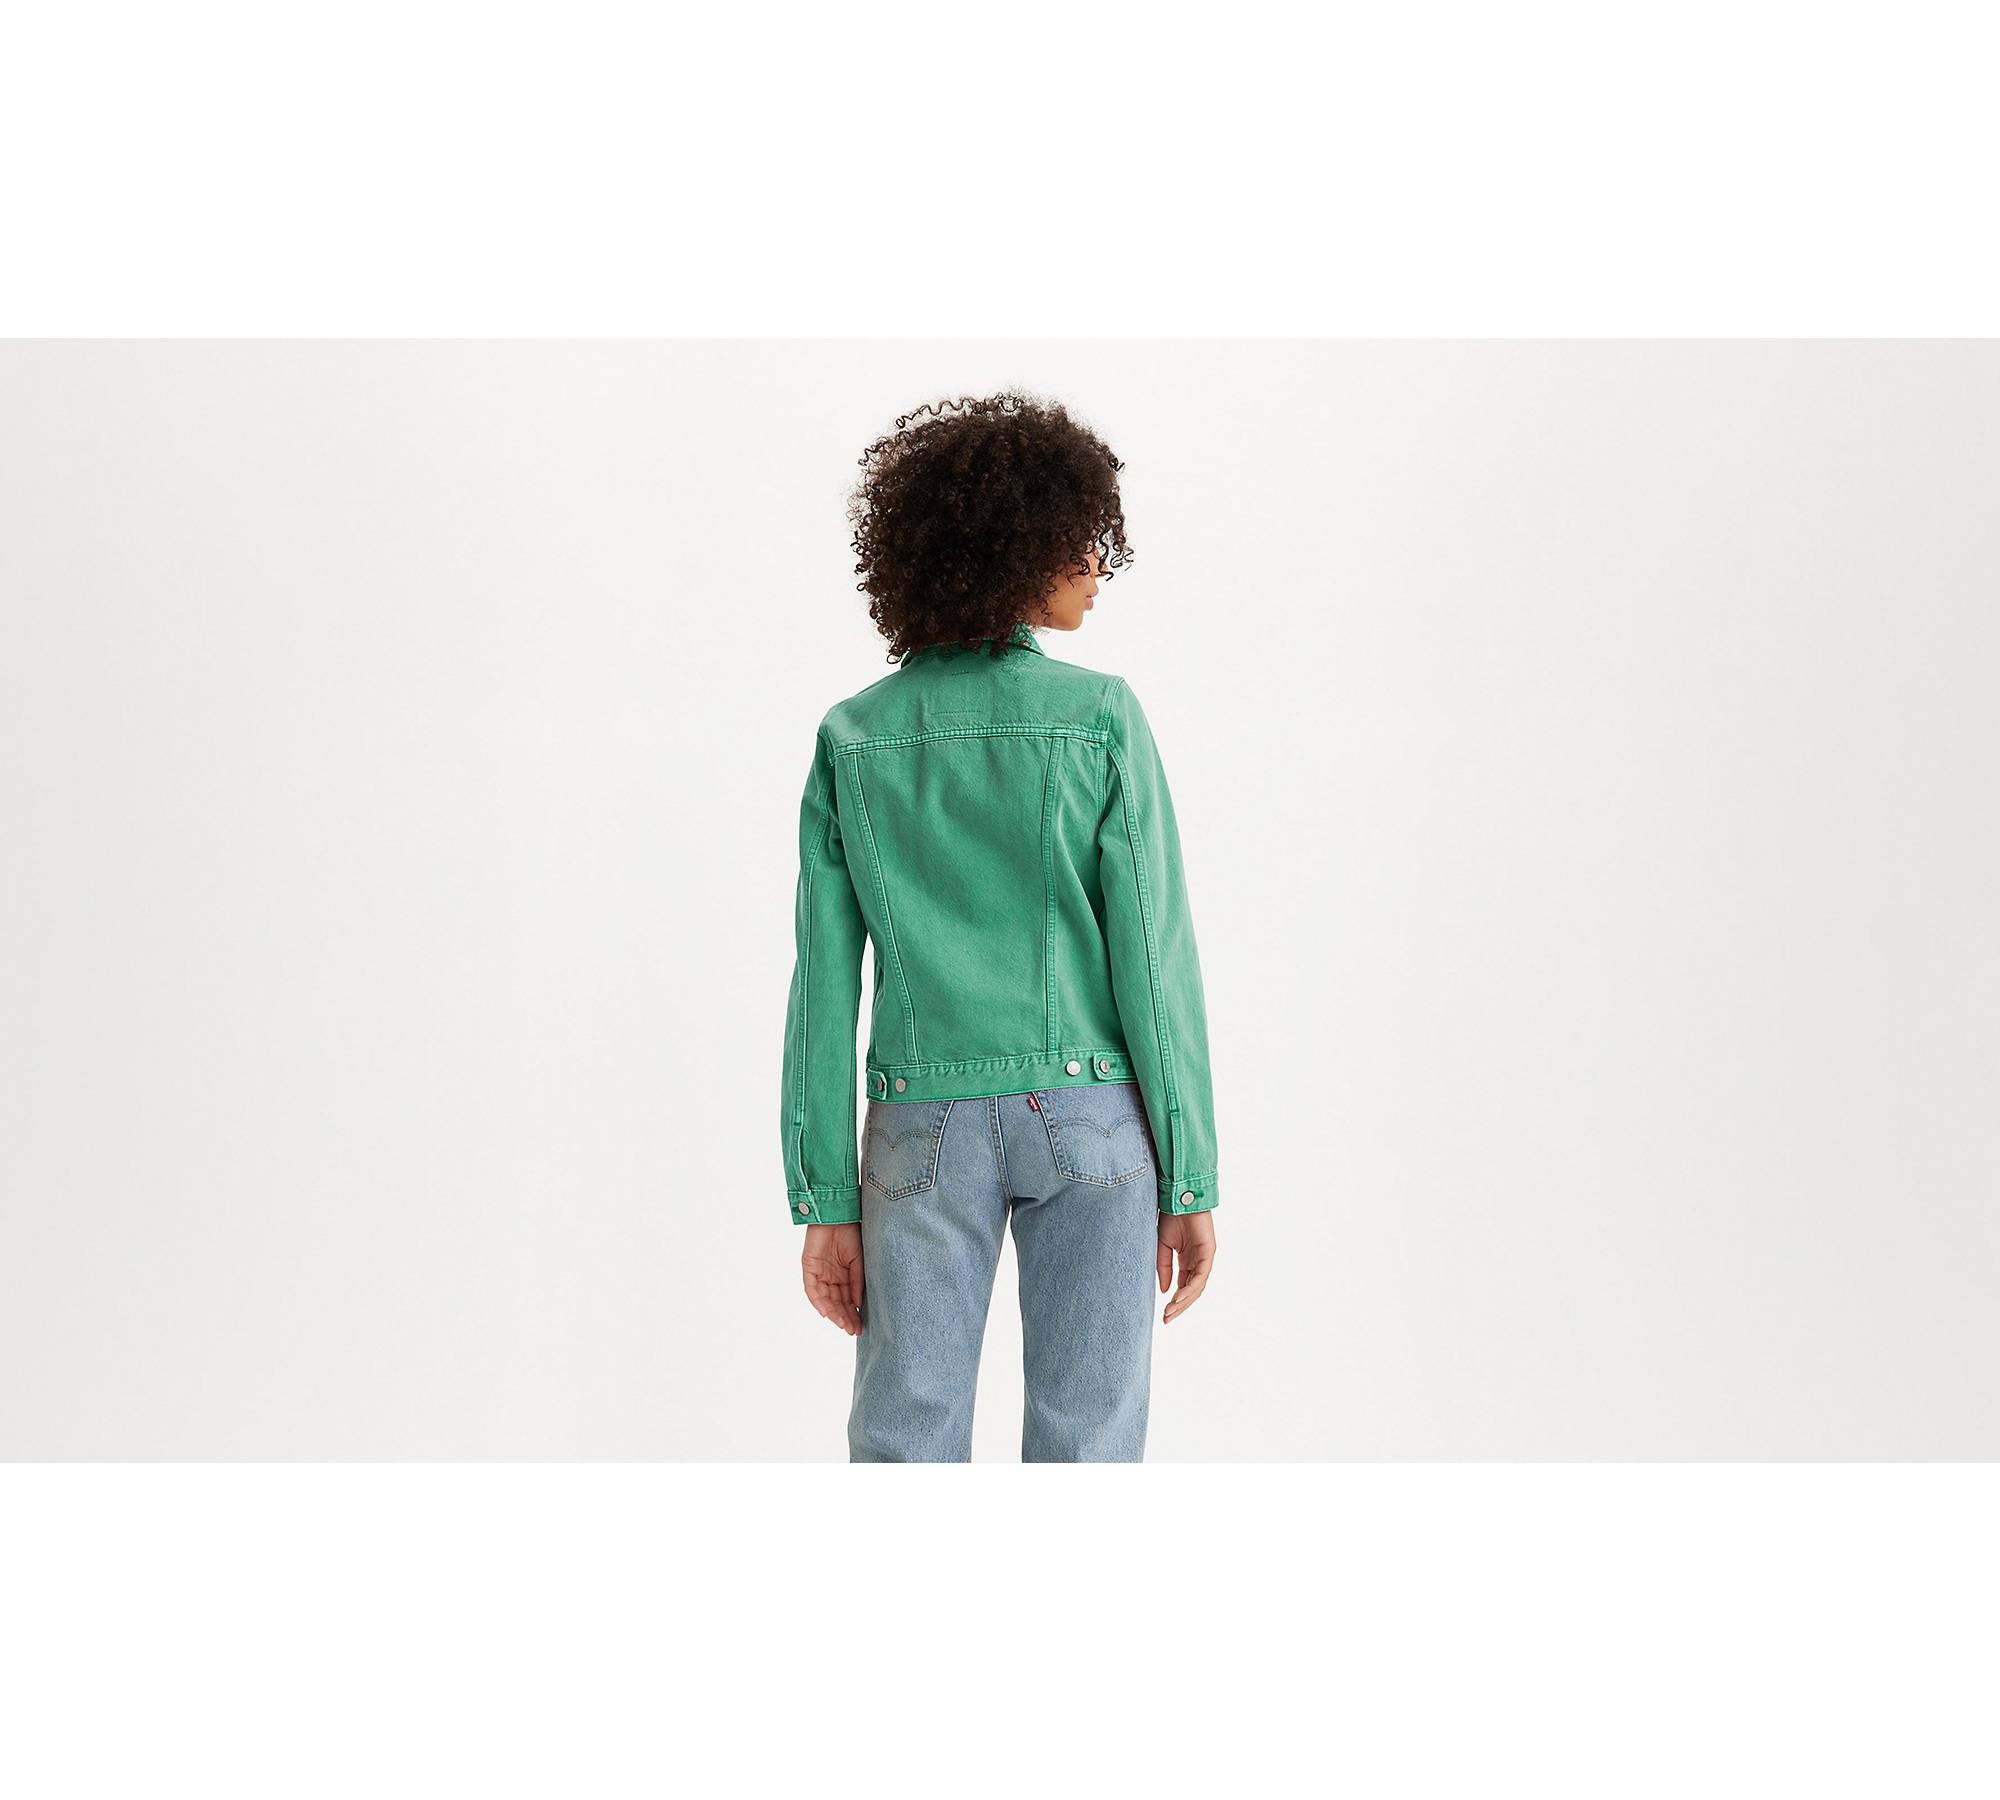 Good News Dusty Teal Green Tunic Sweater – Shop the Mint